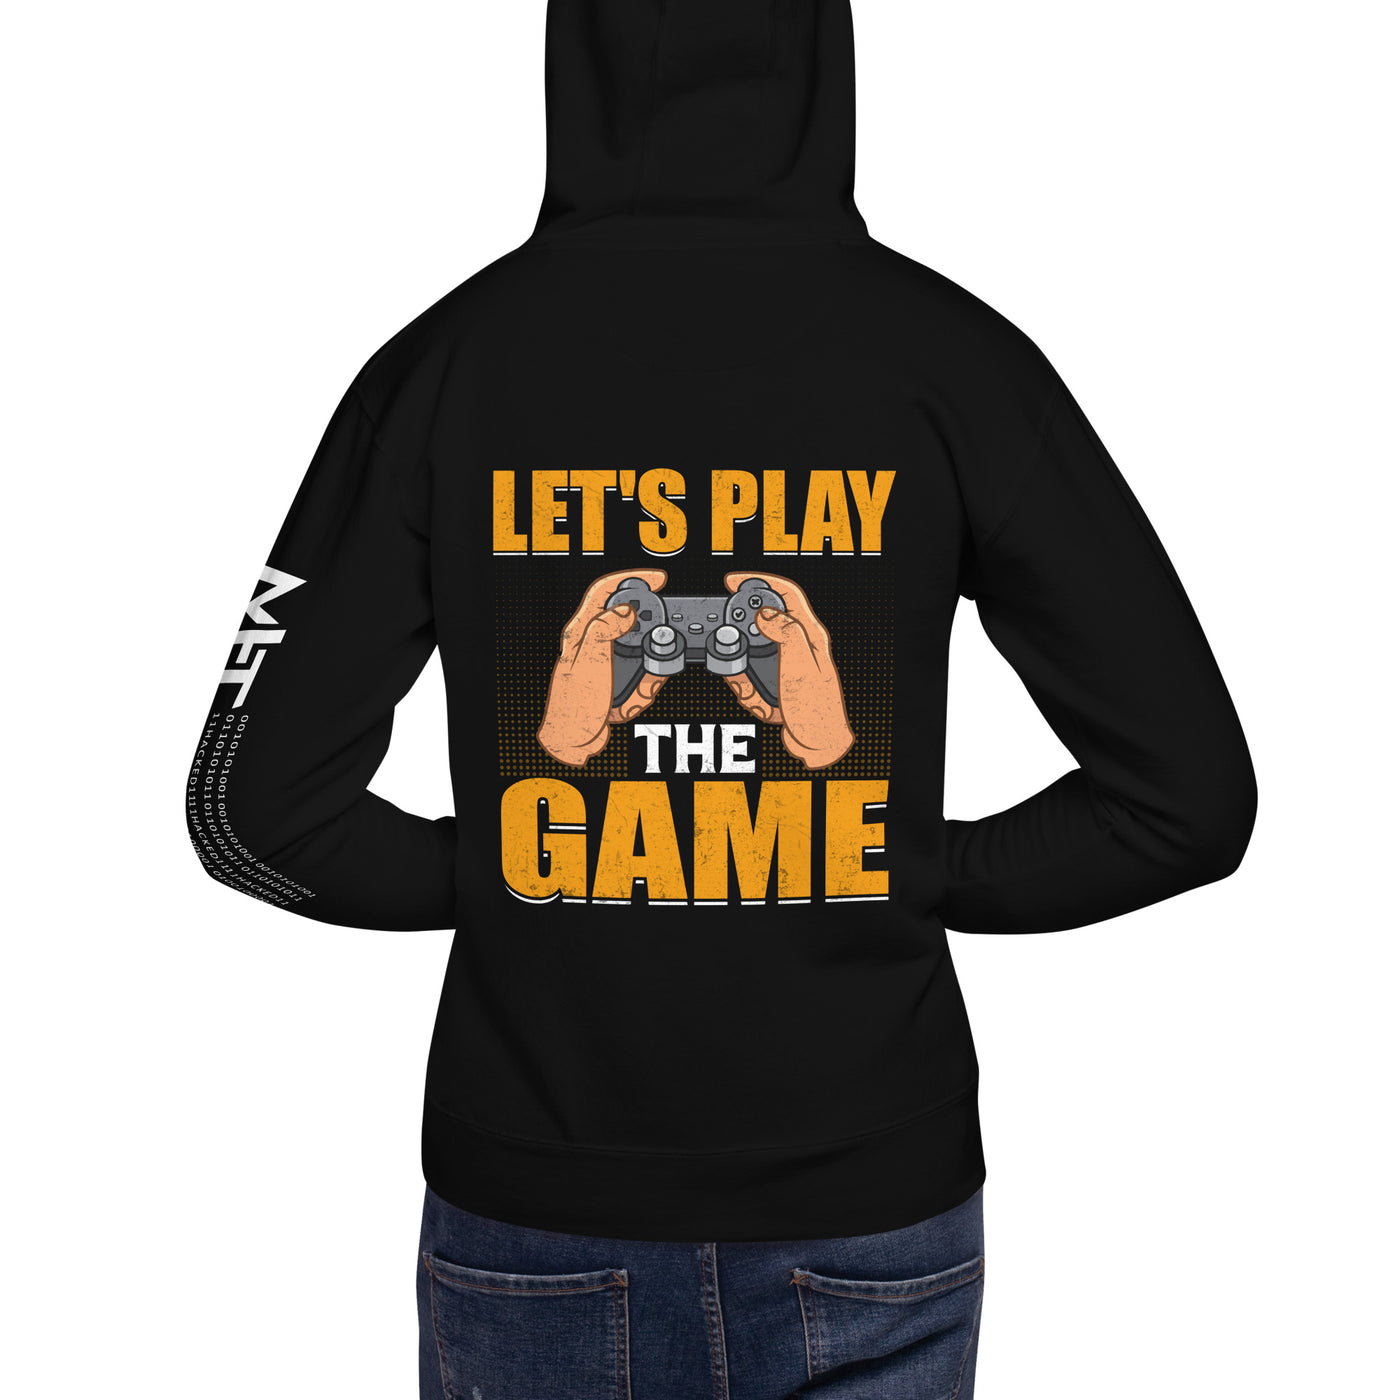 Let's Play the Game - Unisex Hoodie ( Back Print )